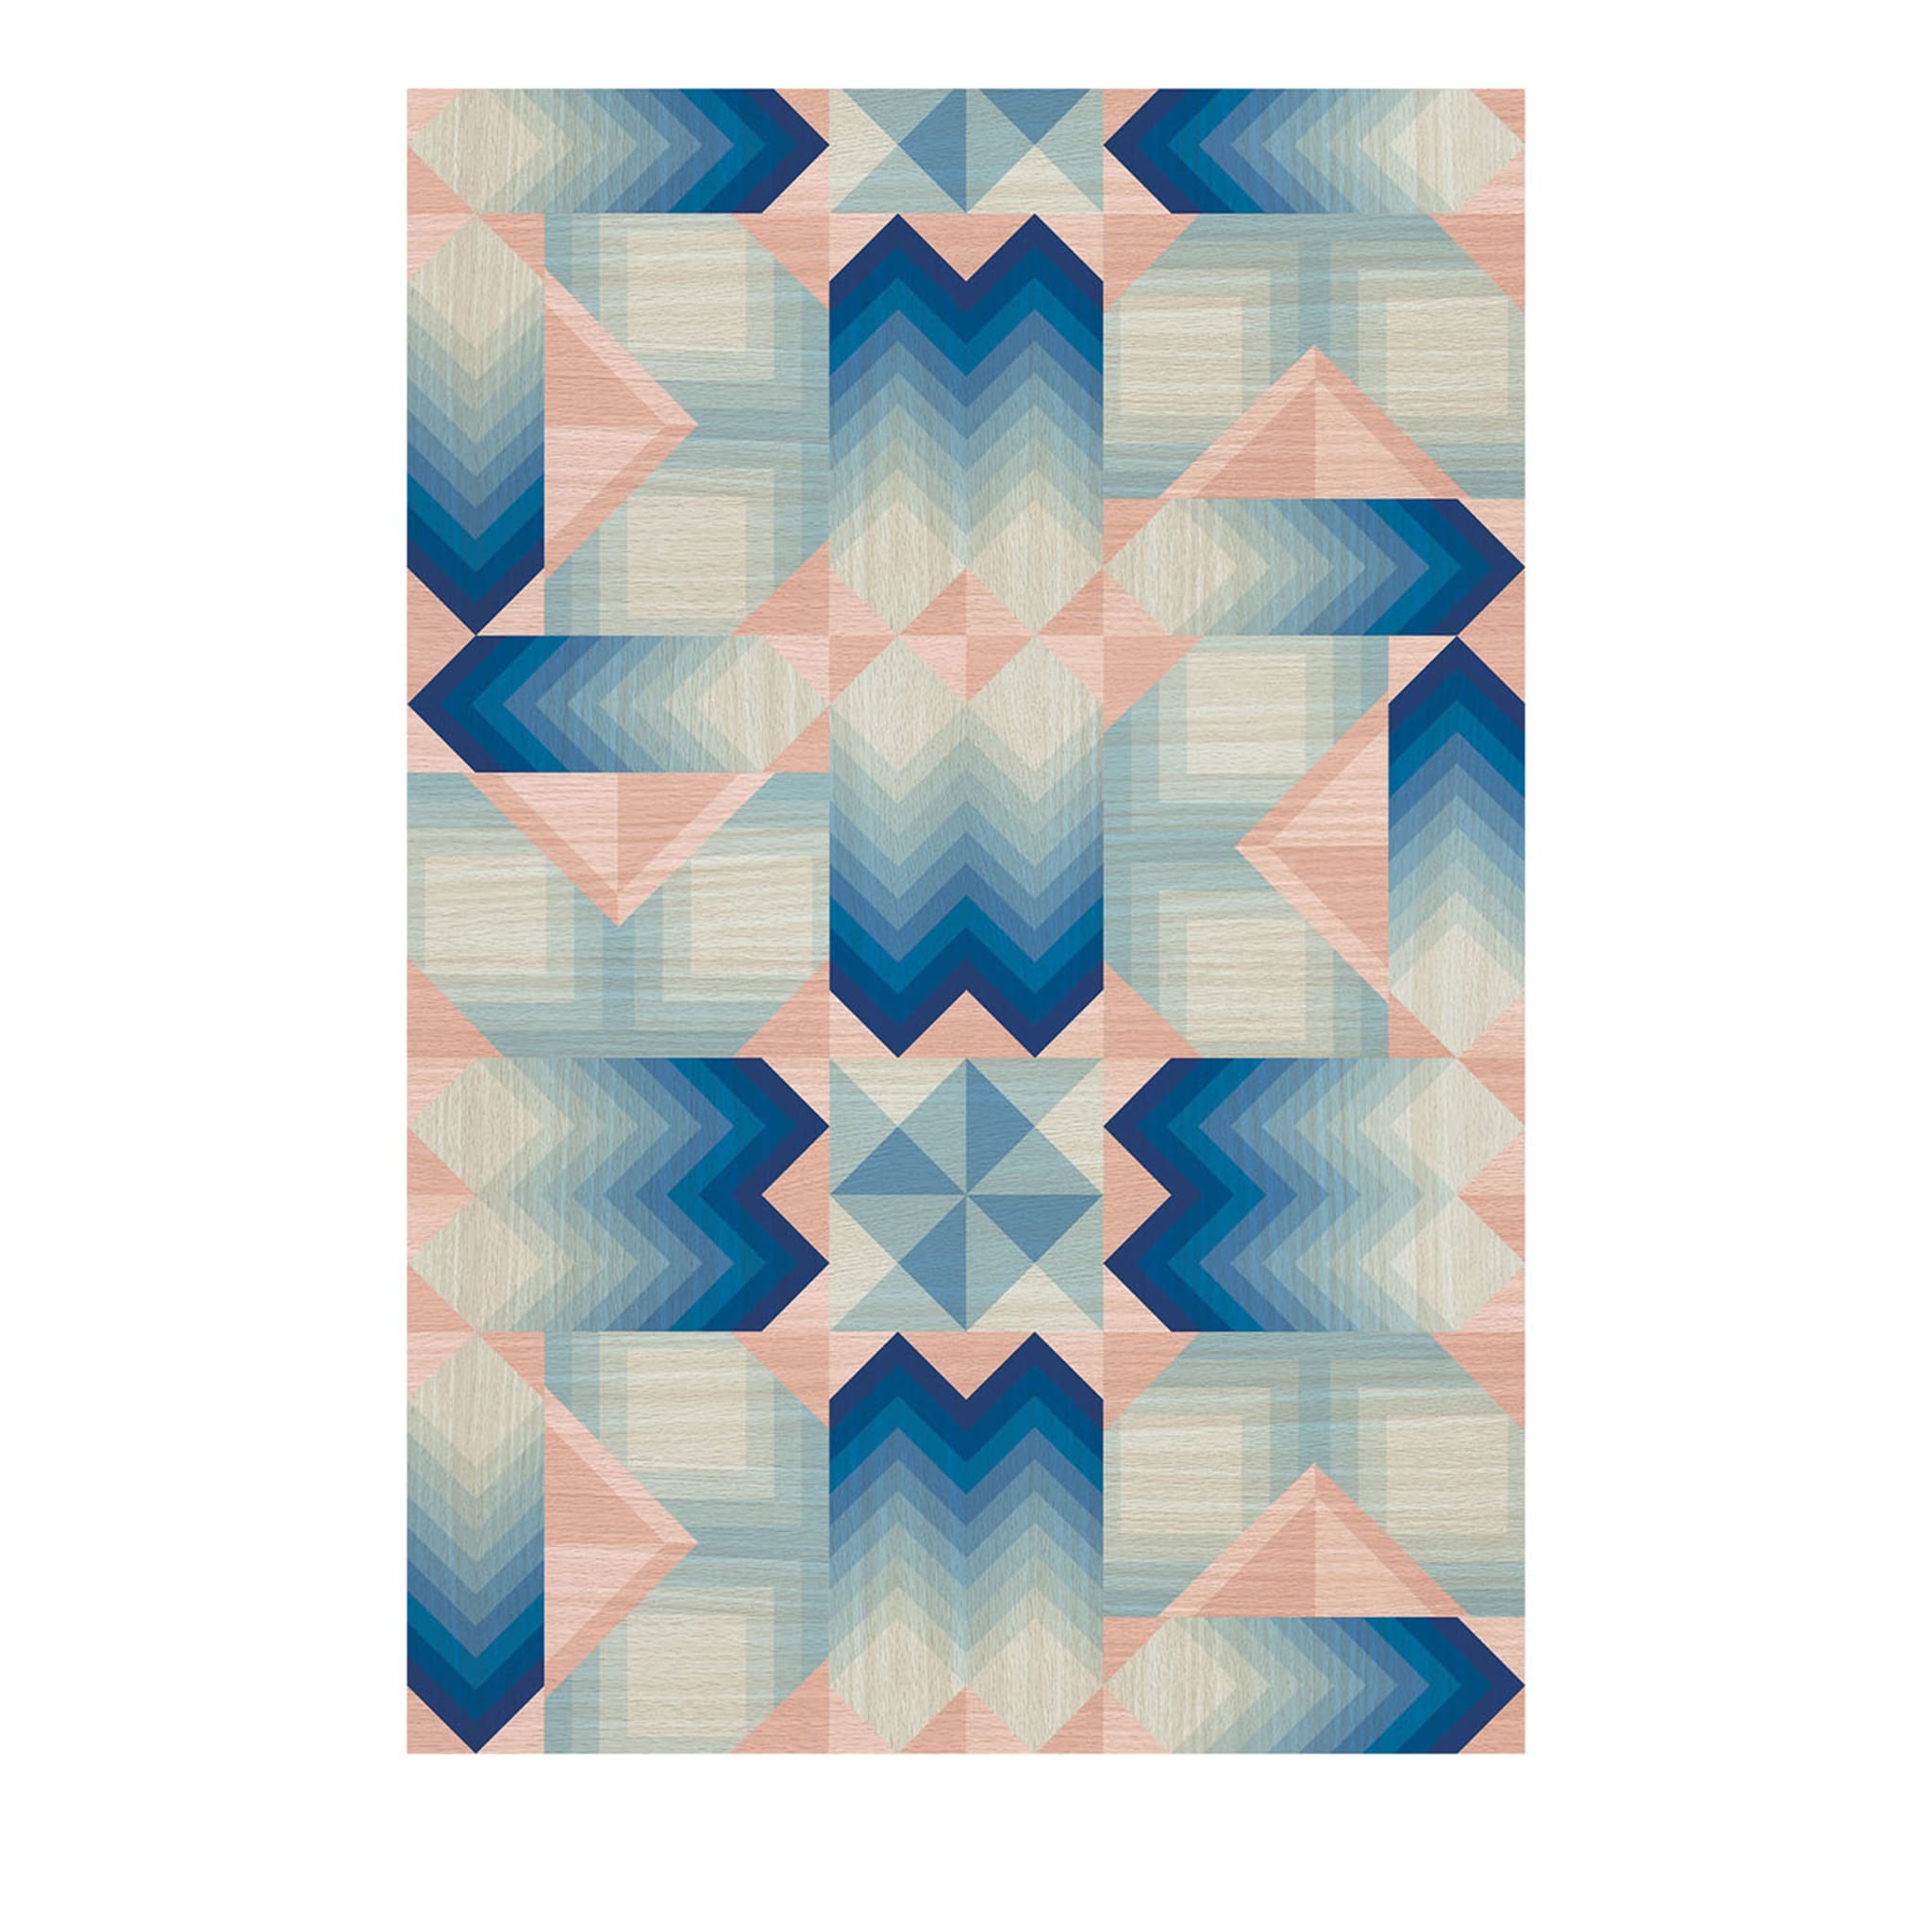 Geometry Square Blue & Pink Wallpaper - Main view